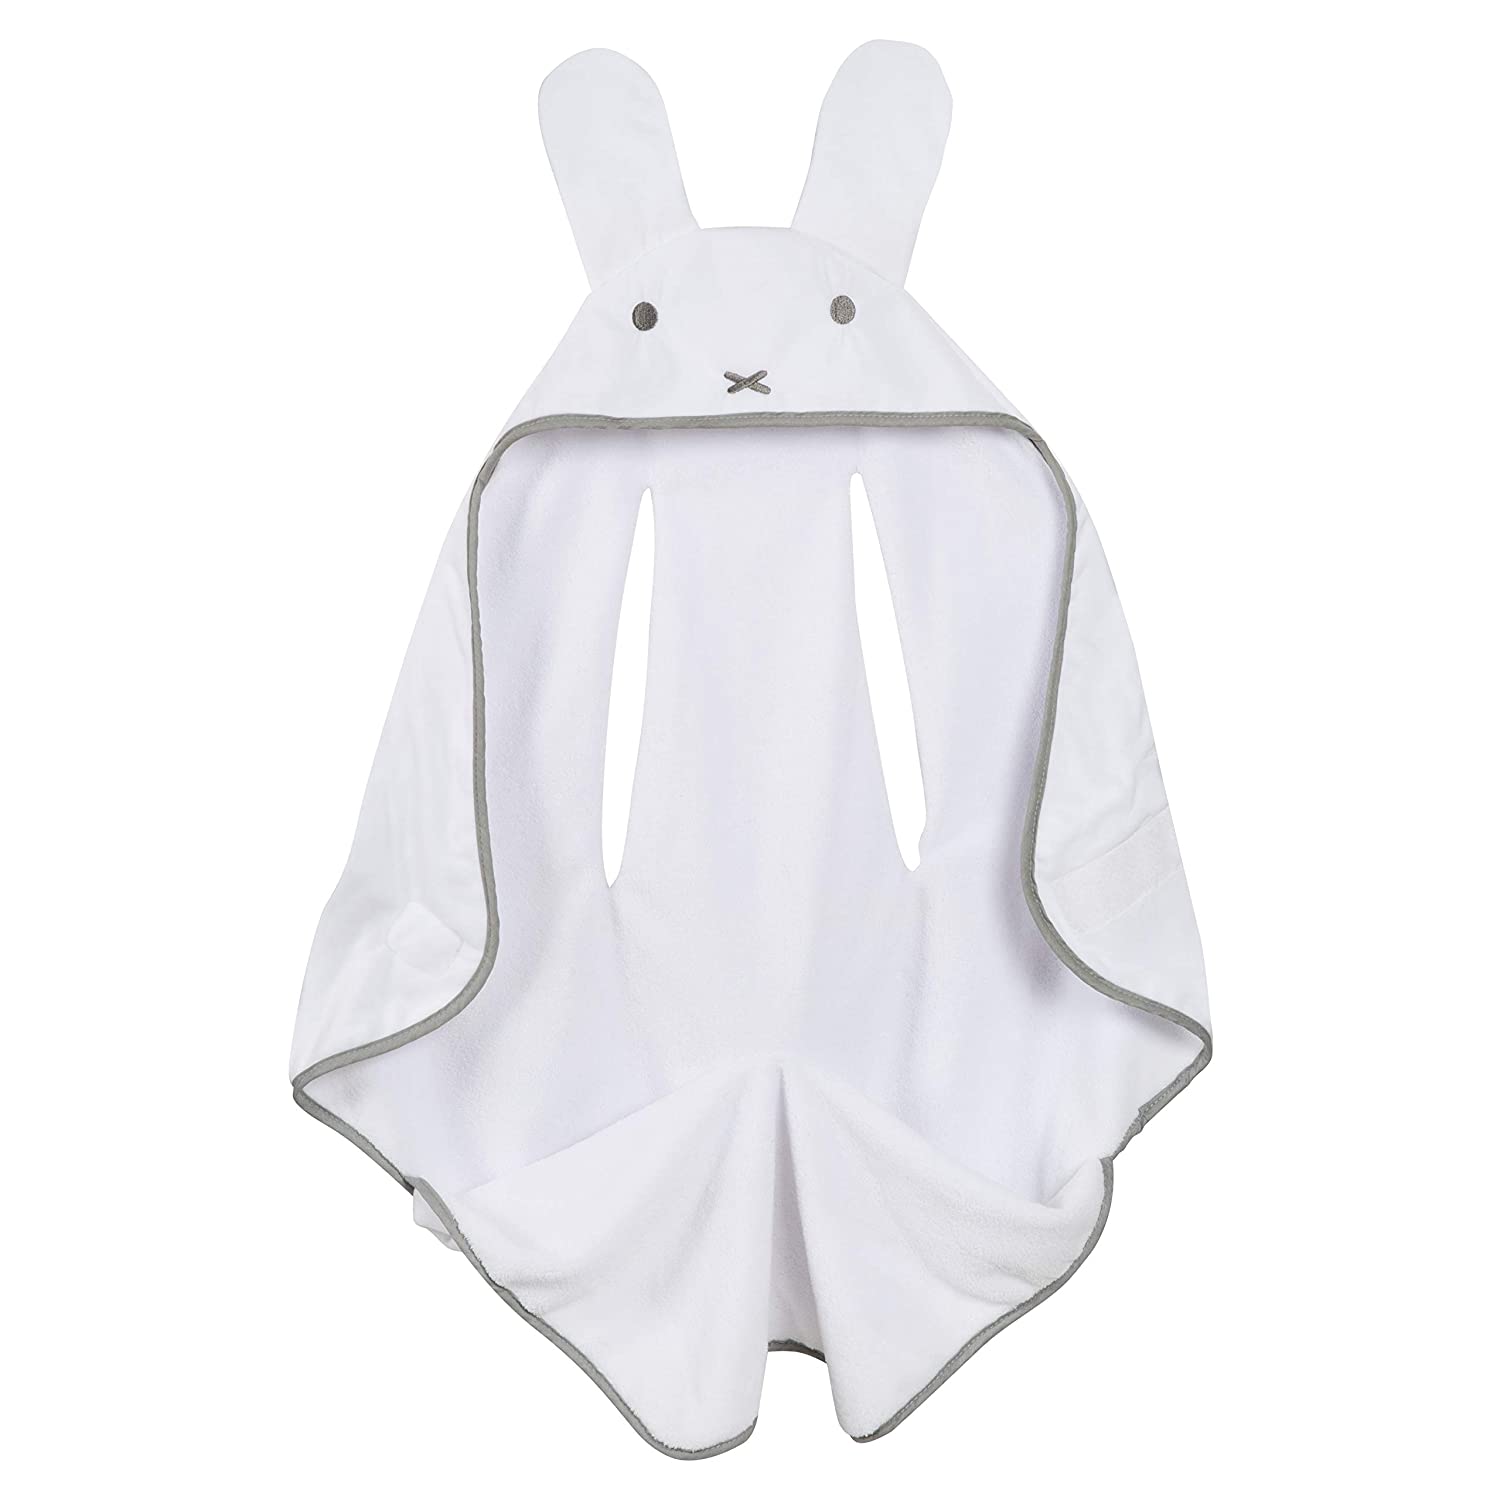 roba 306116P210 \"Miffy\" baby blanket with slots for seat belts, universal baby blanket for all car seats, baby seats, buggies, prams, super soft plush microfibre, white